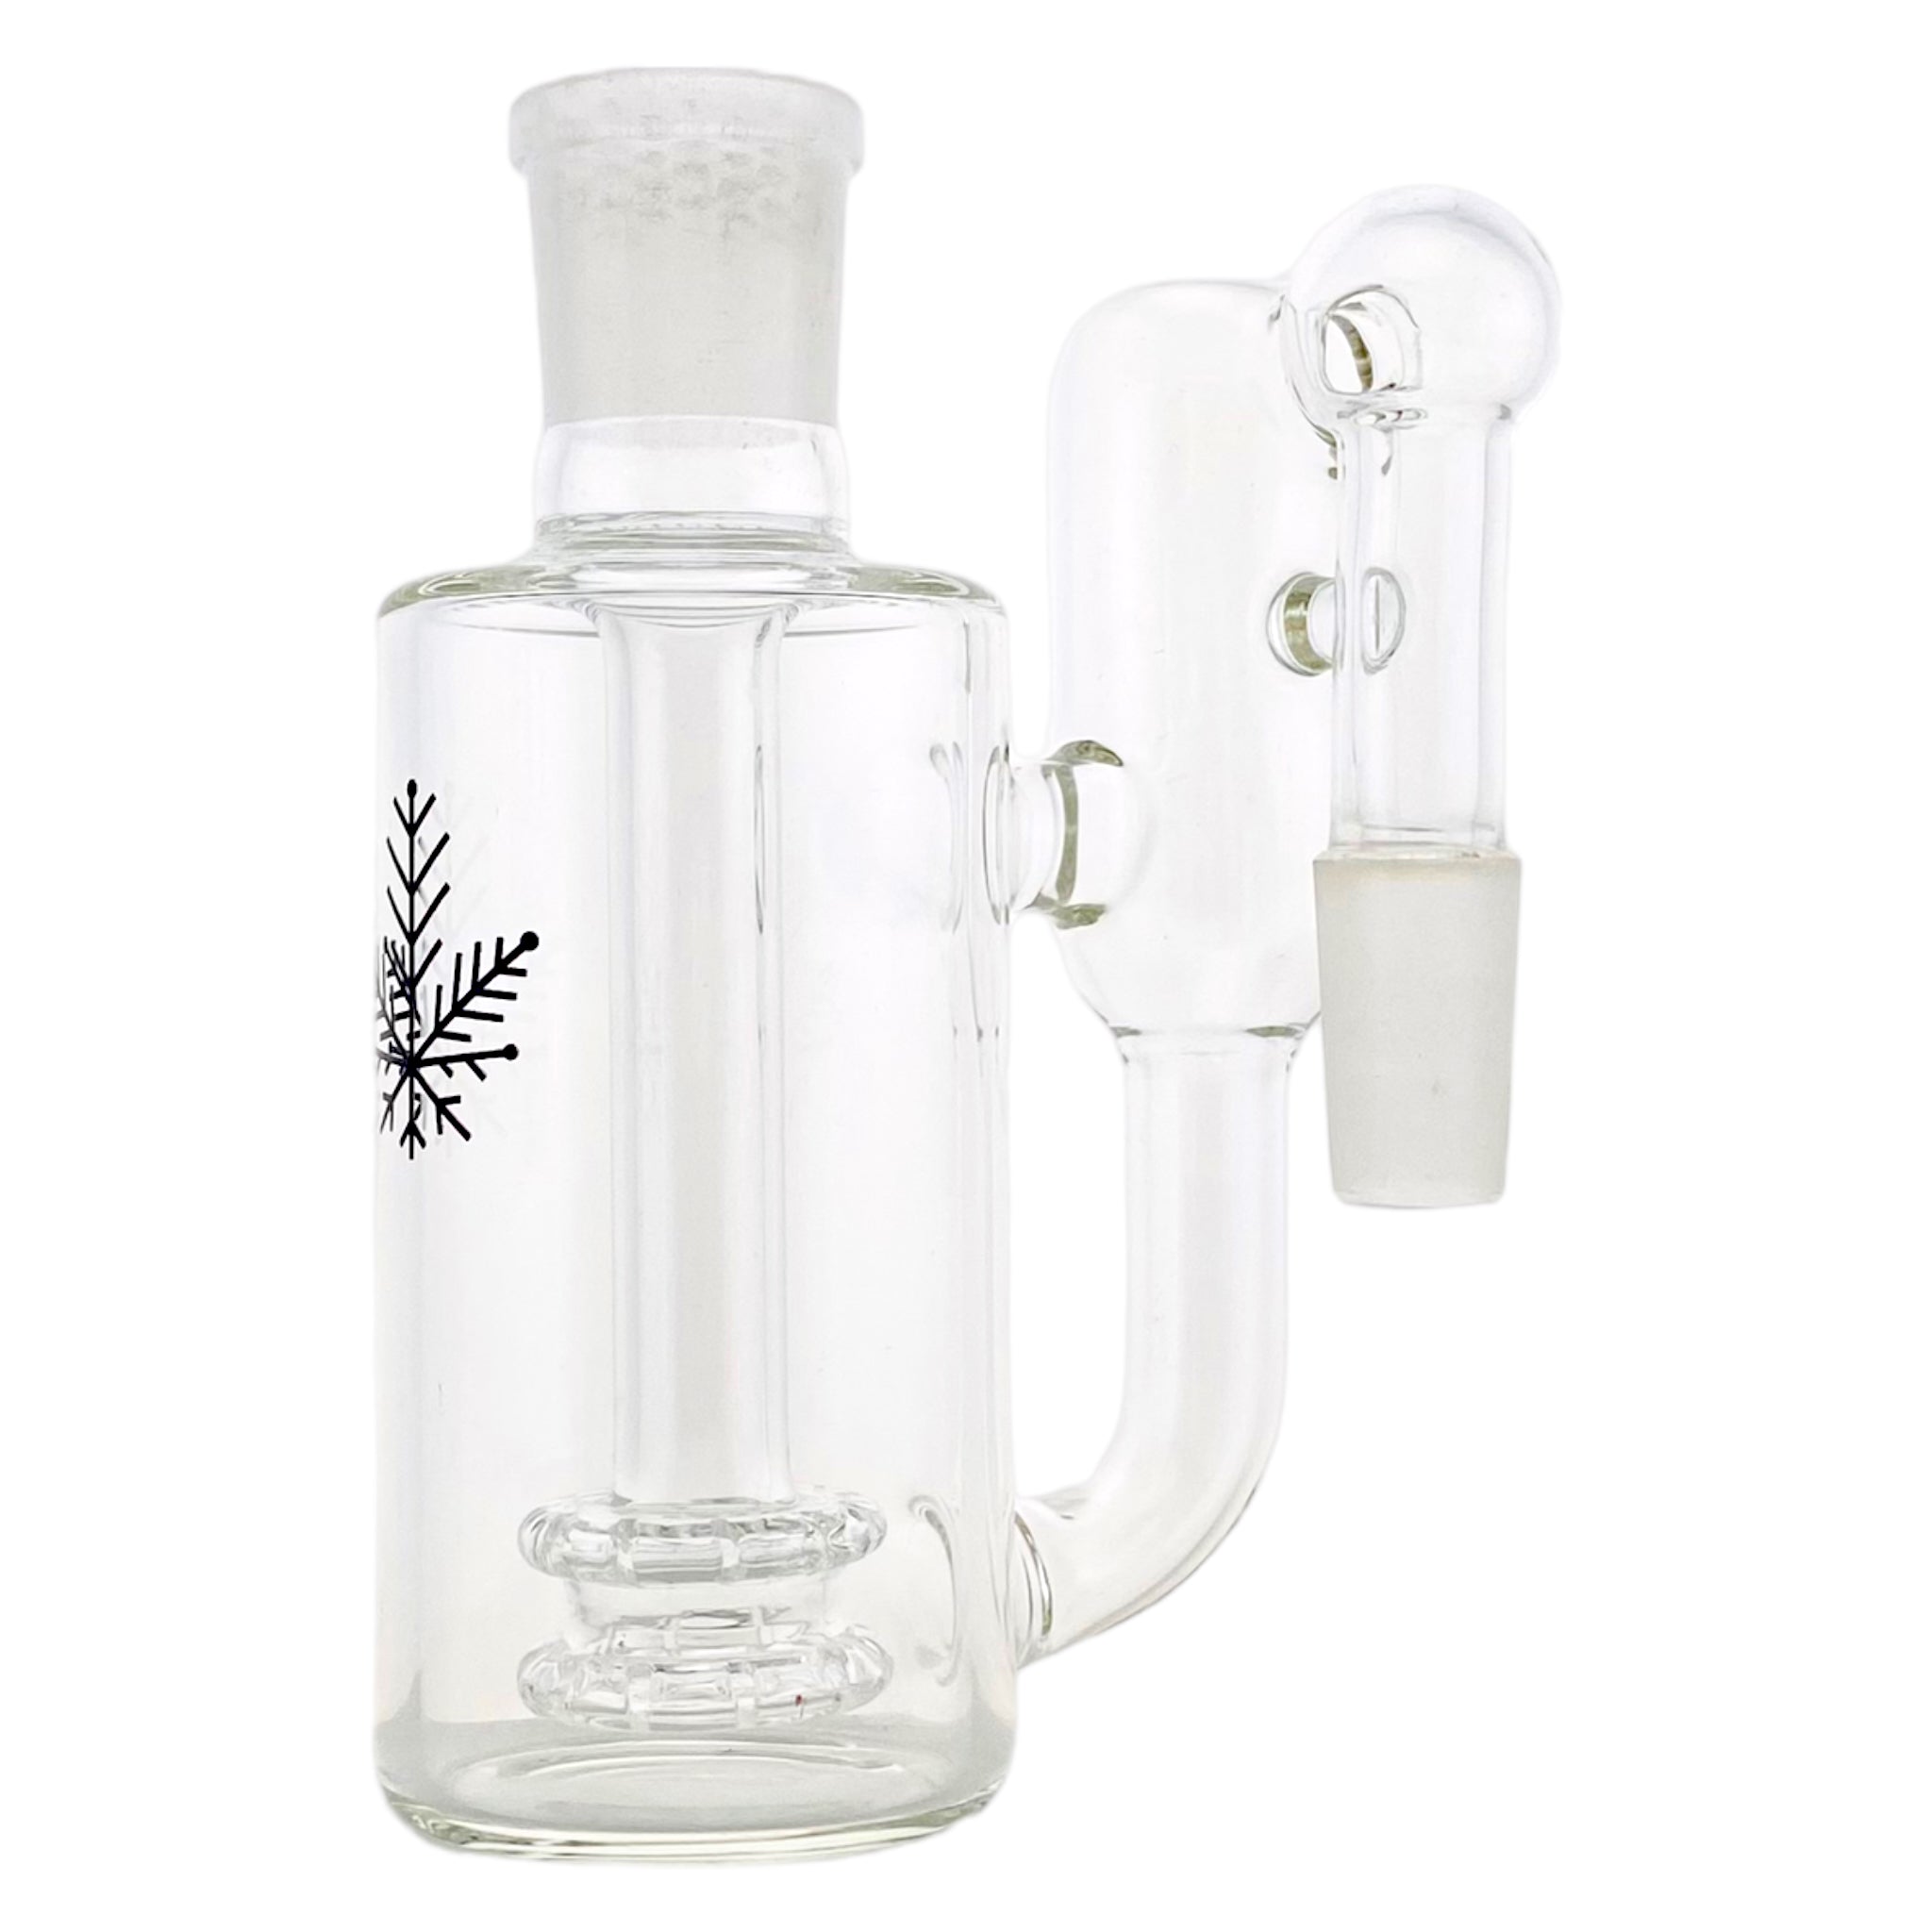 Freeze Pipe - 14mm Recycler Ash Catcher With Shower Head Perc